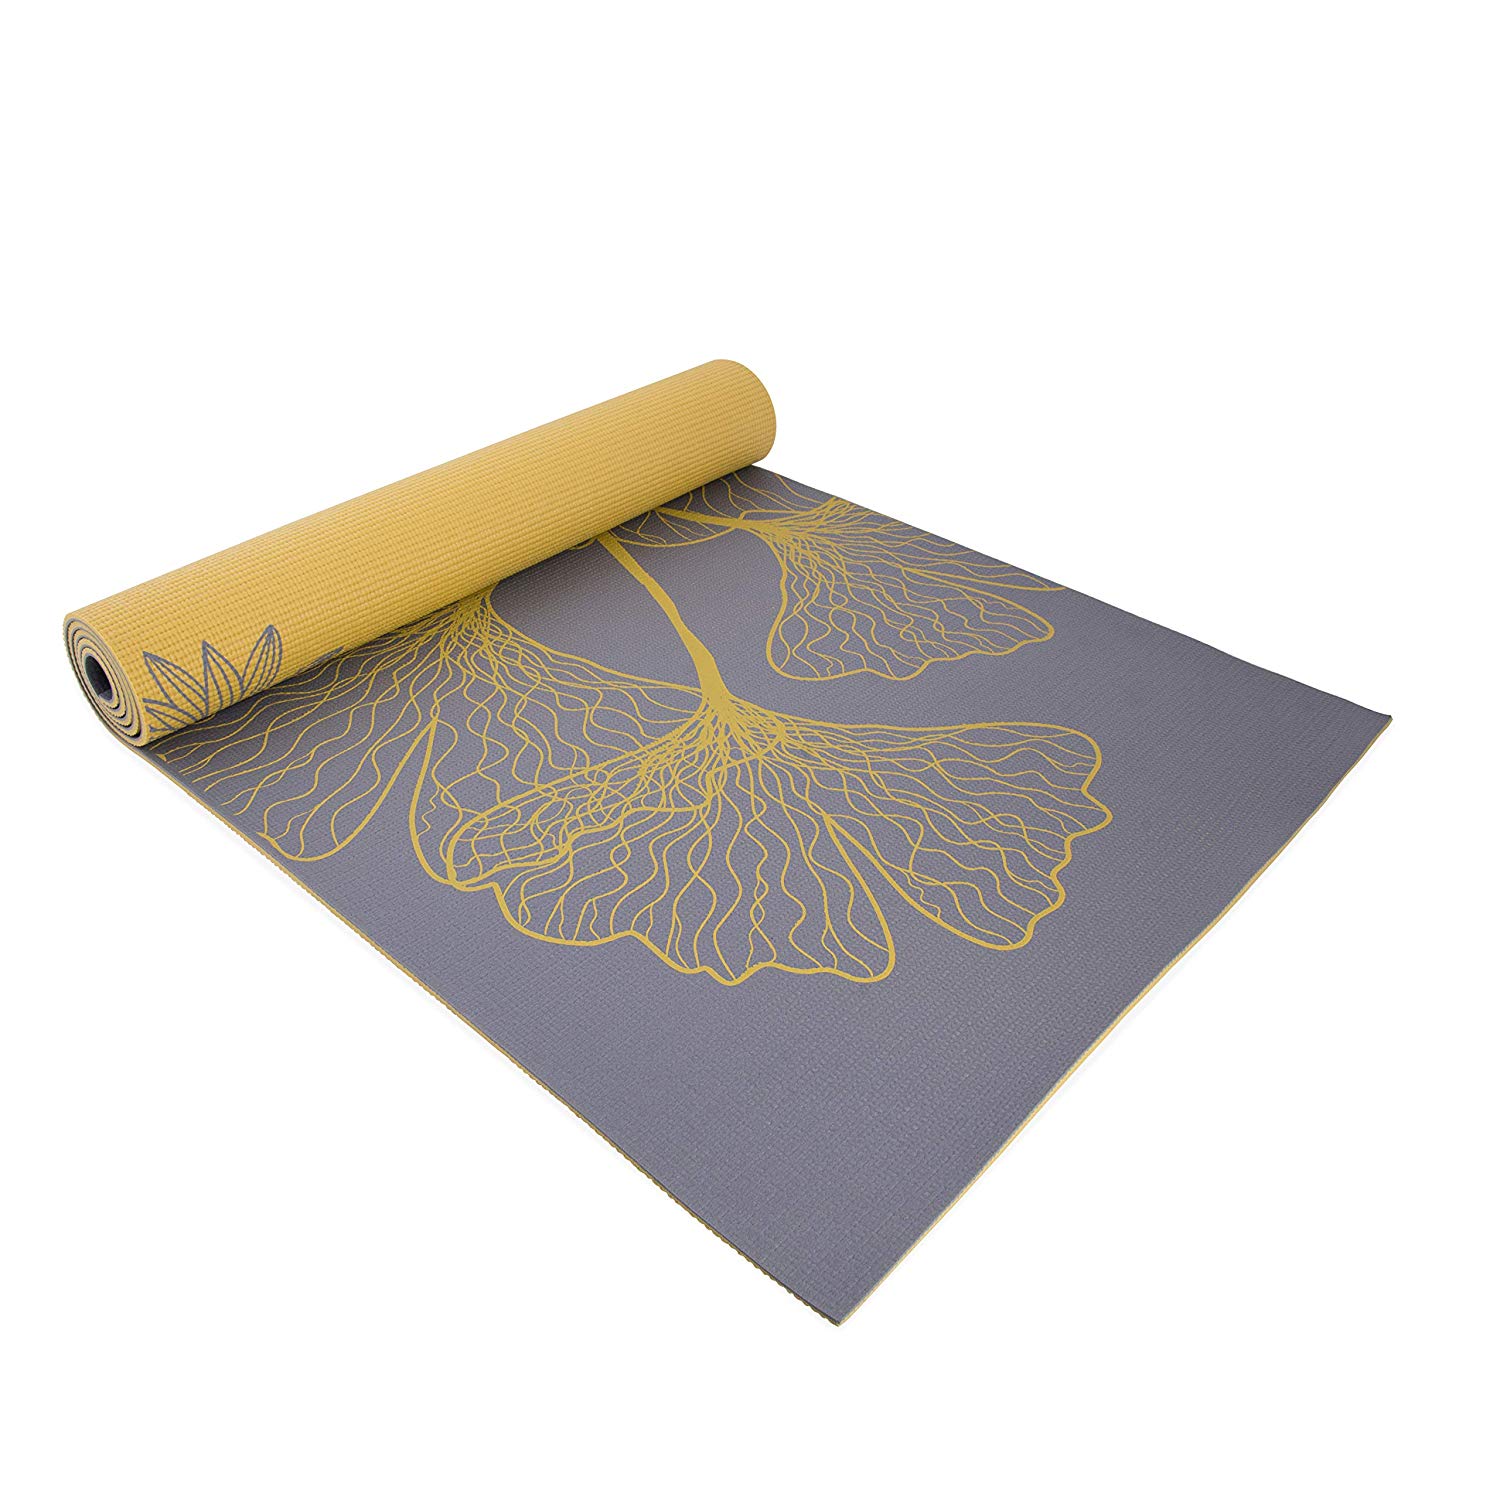 CAP Yoga Reversible Yoga Mat, 5mm with Carry Strap, Dahlia and Ginkgo - image 2 of 5